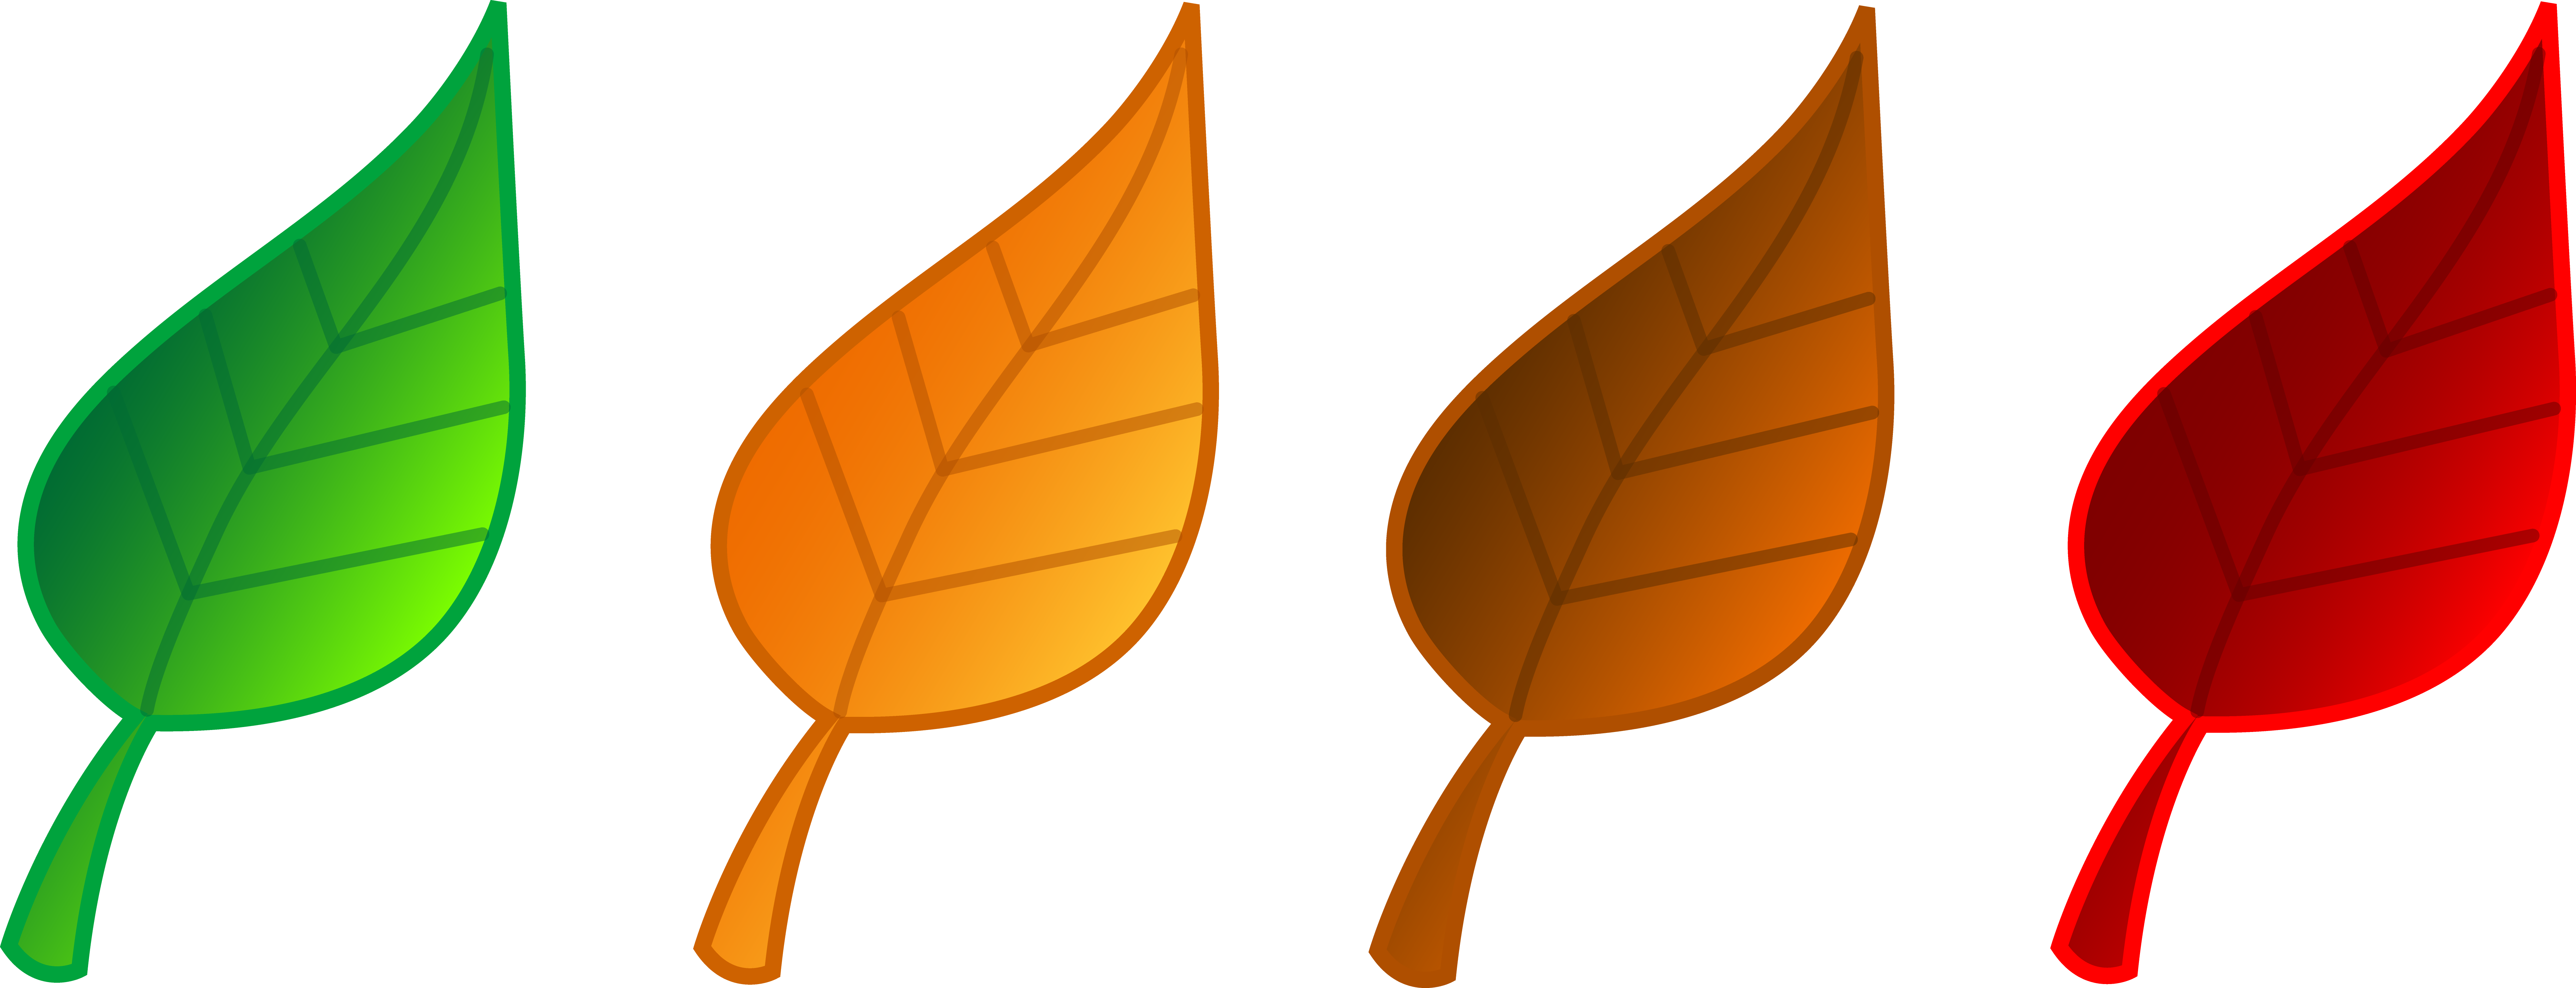 free clipart images leaves - photo #24